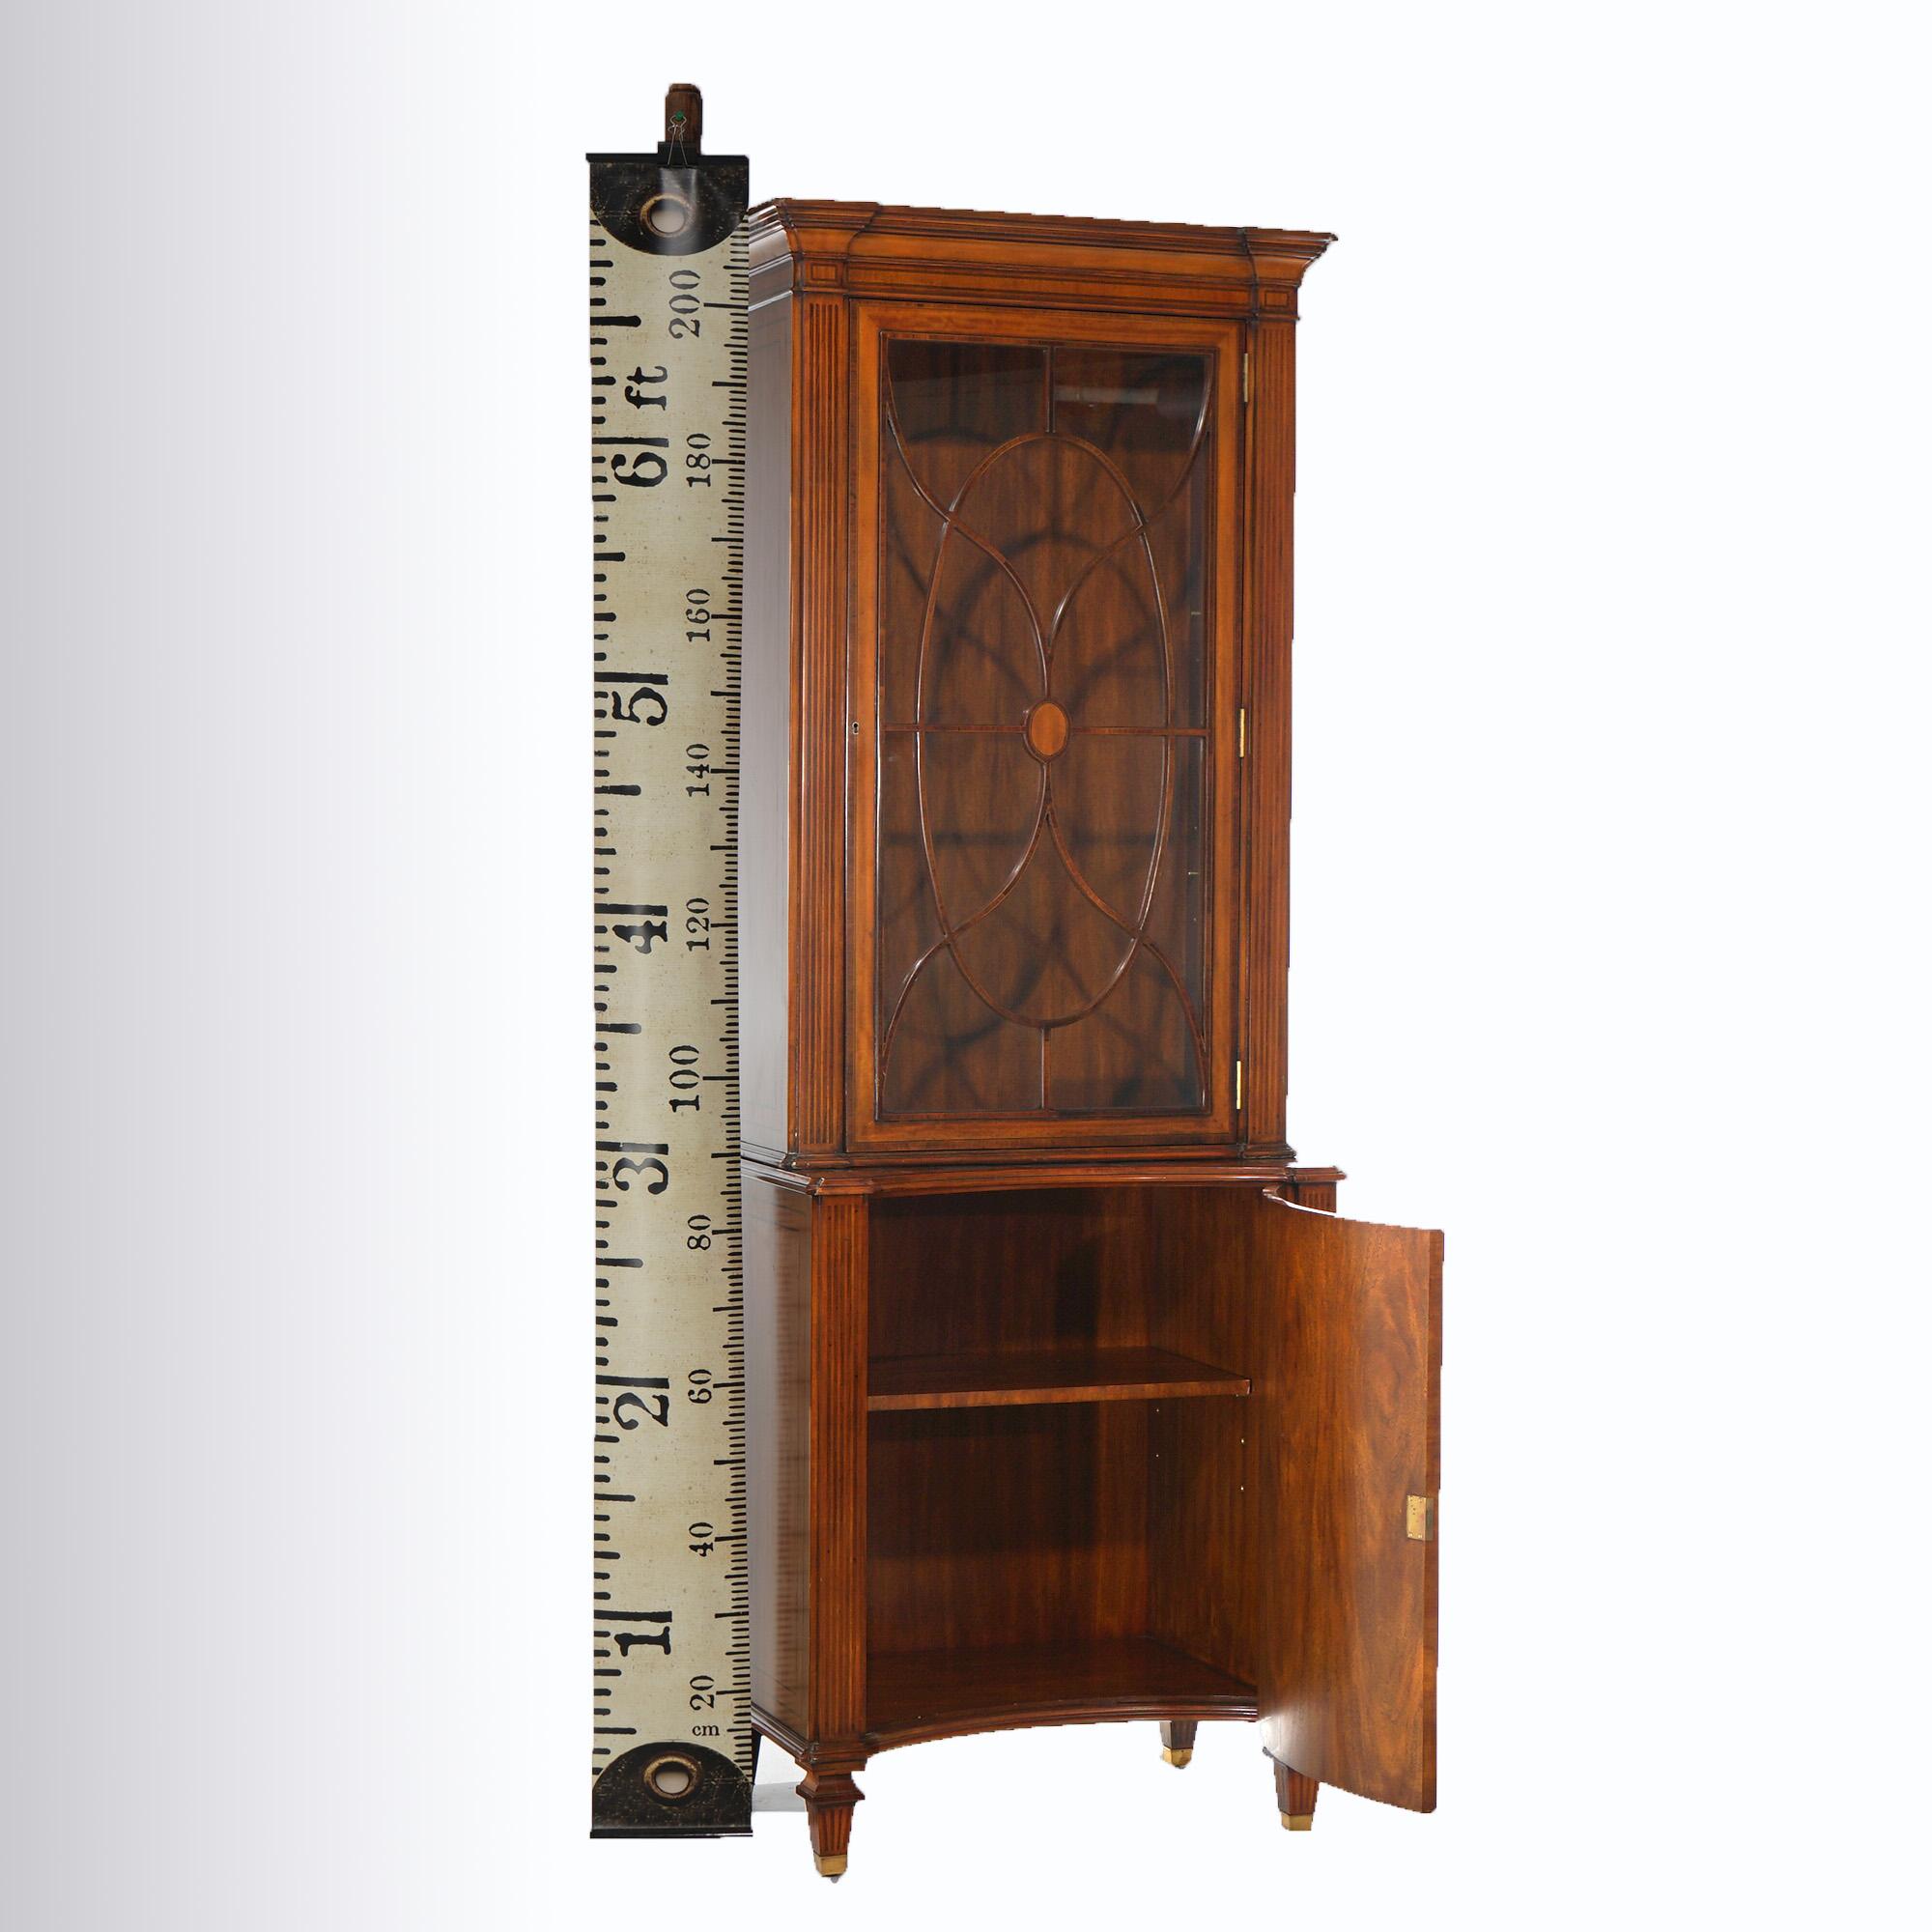 Glass Maitland Smith Mahogany Inlay & Banded Bookcase 20thC For Sale